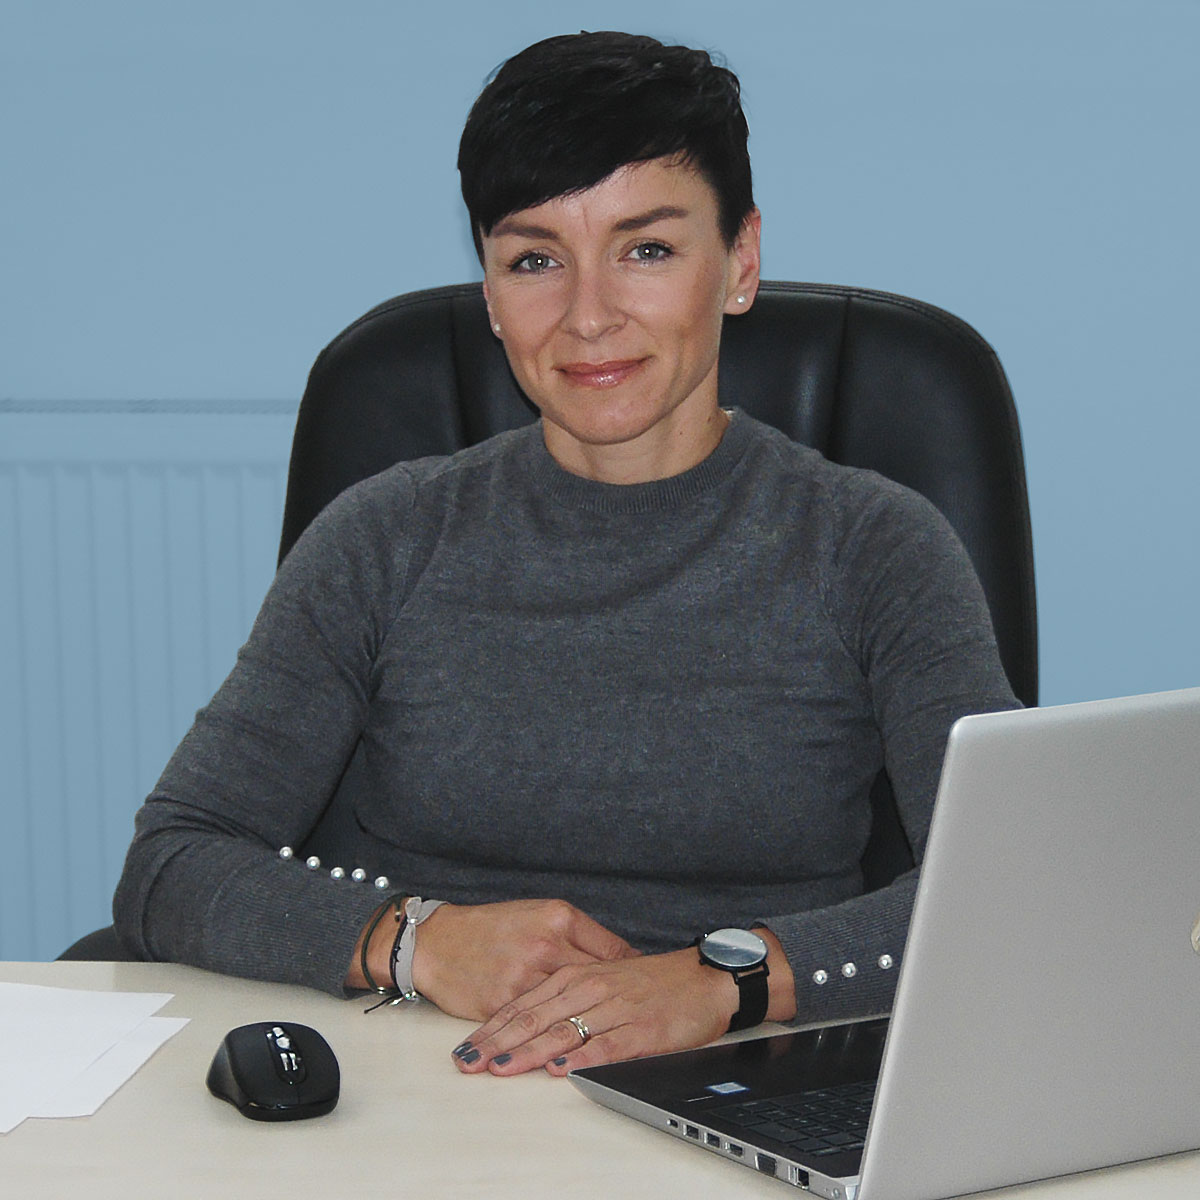 Petra is our project manager for Czech Republic and Slowakia